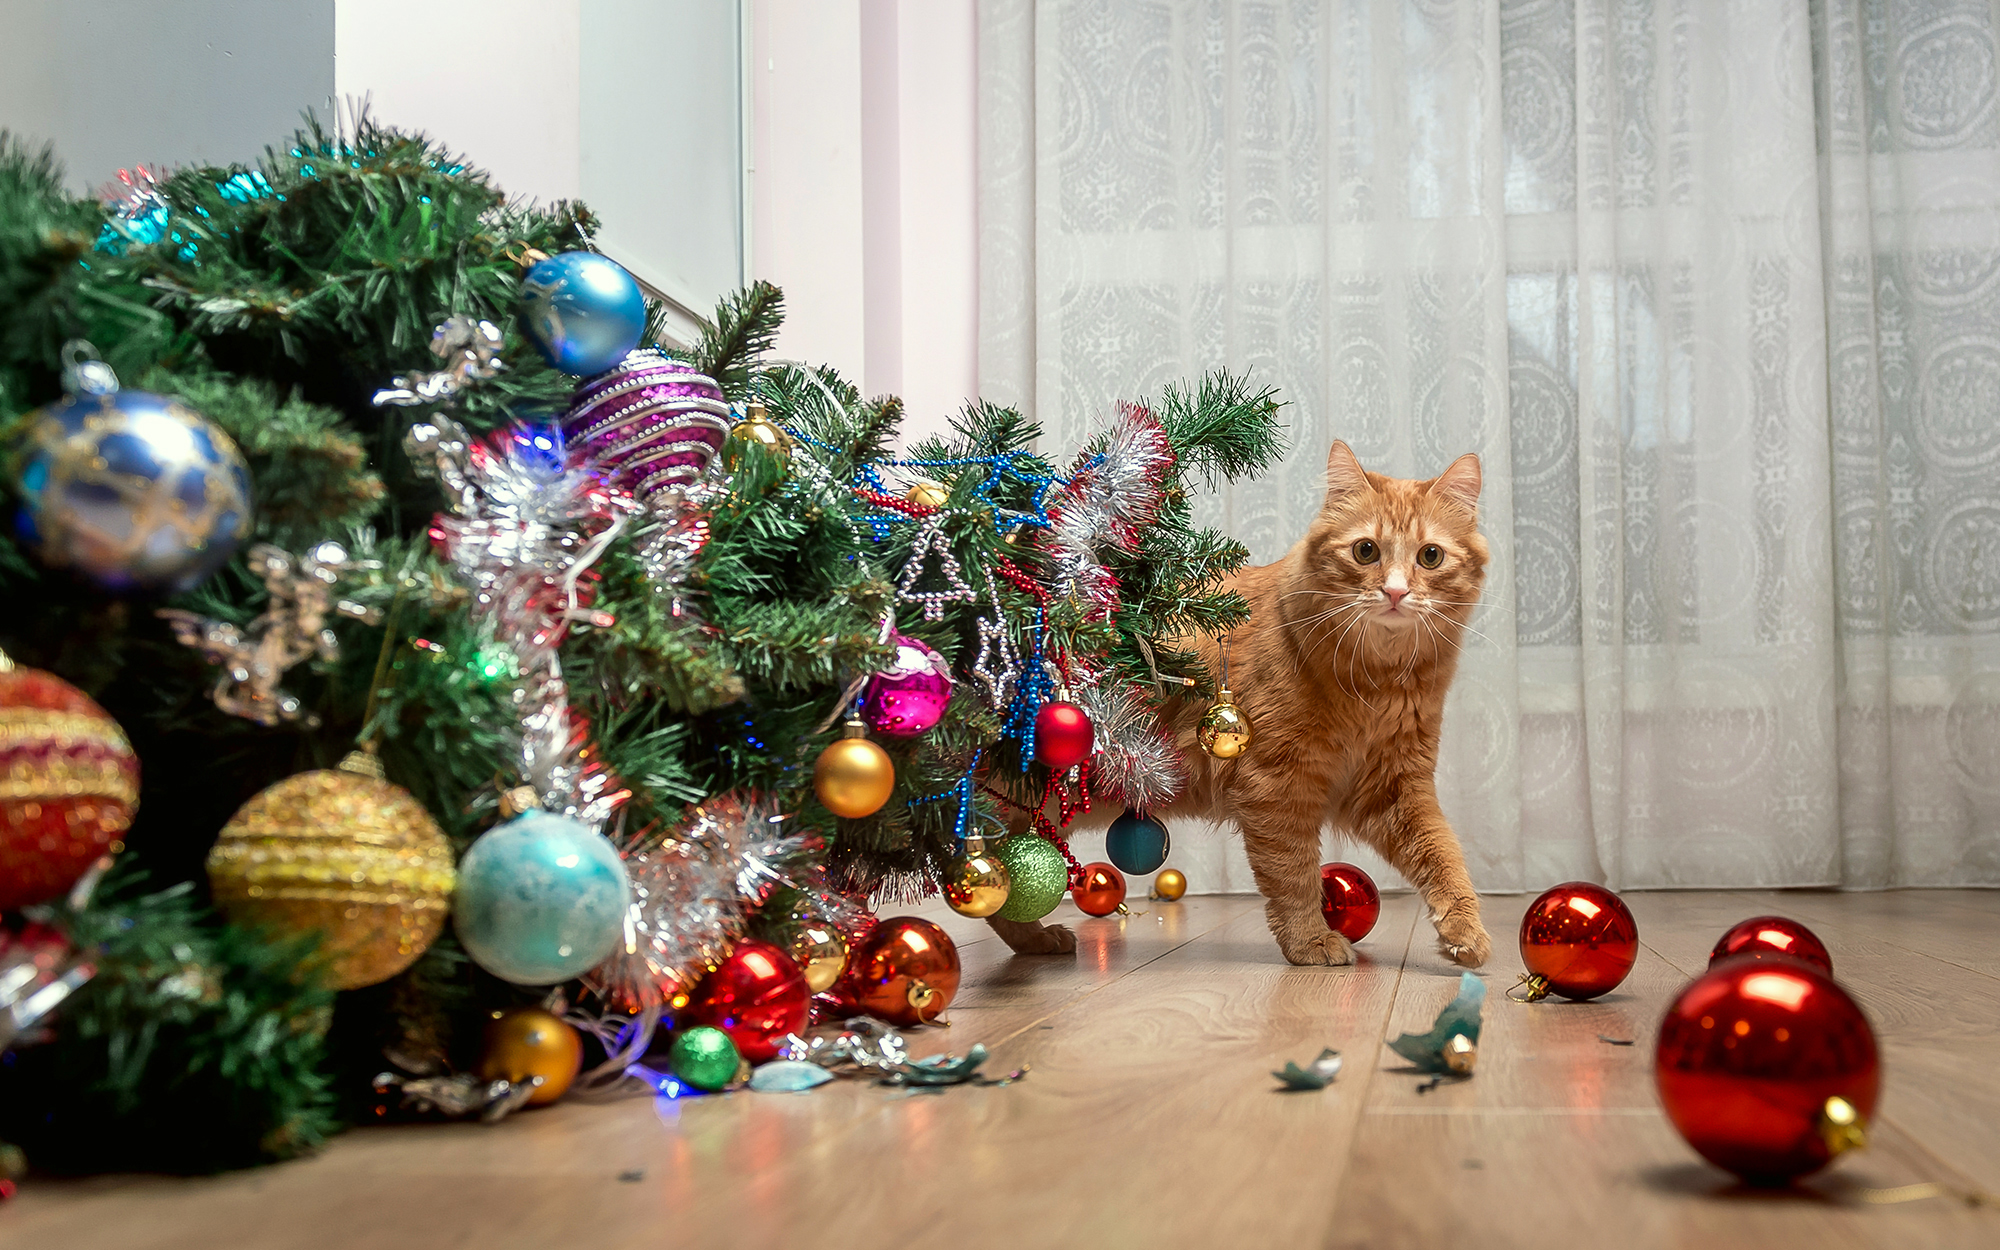 cat walks around fallen Christmas tree with broken and smashed Christmas ornaments